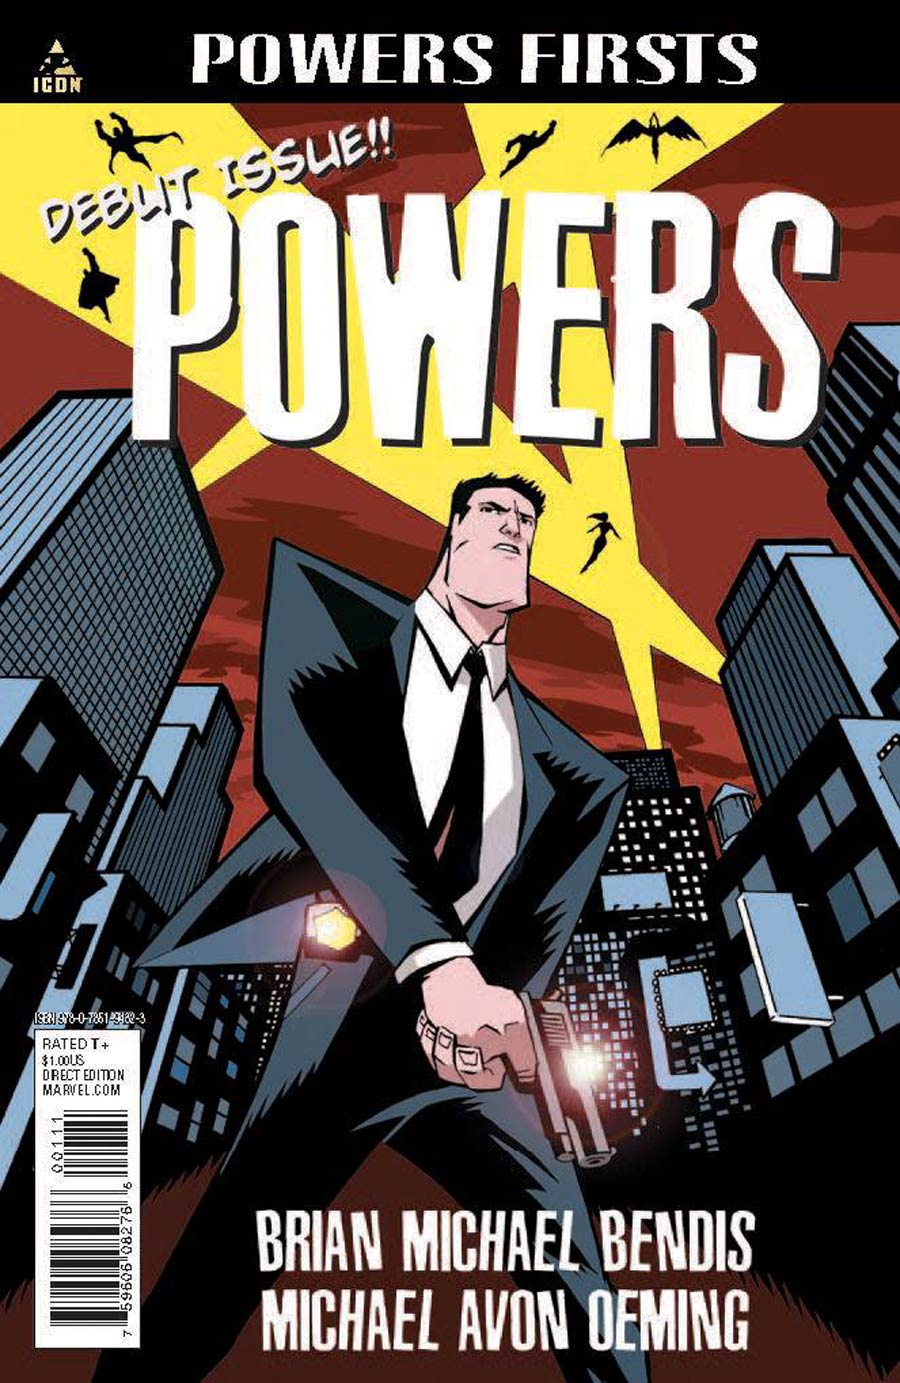 Powers Firsts #1